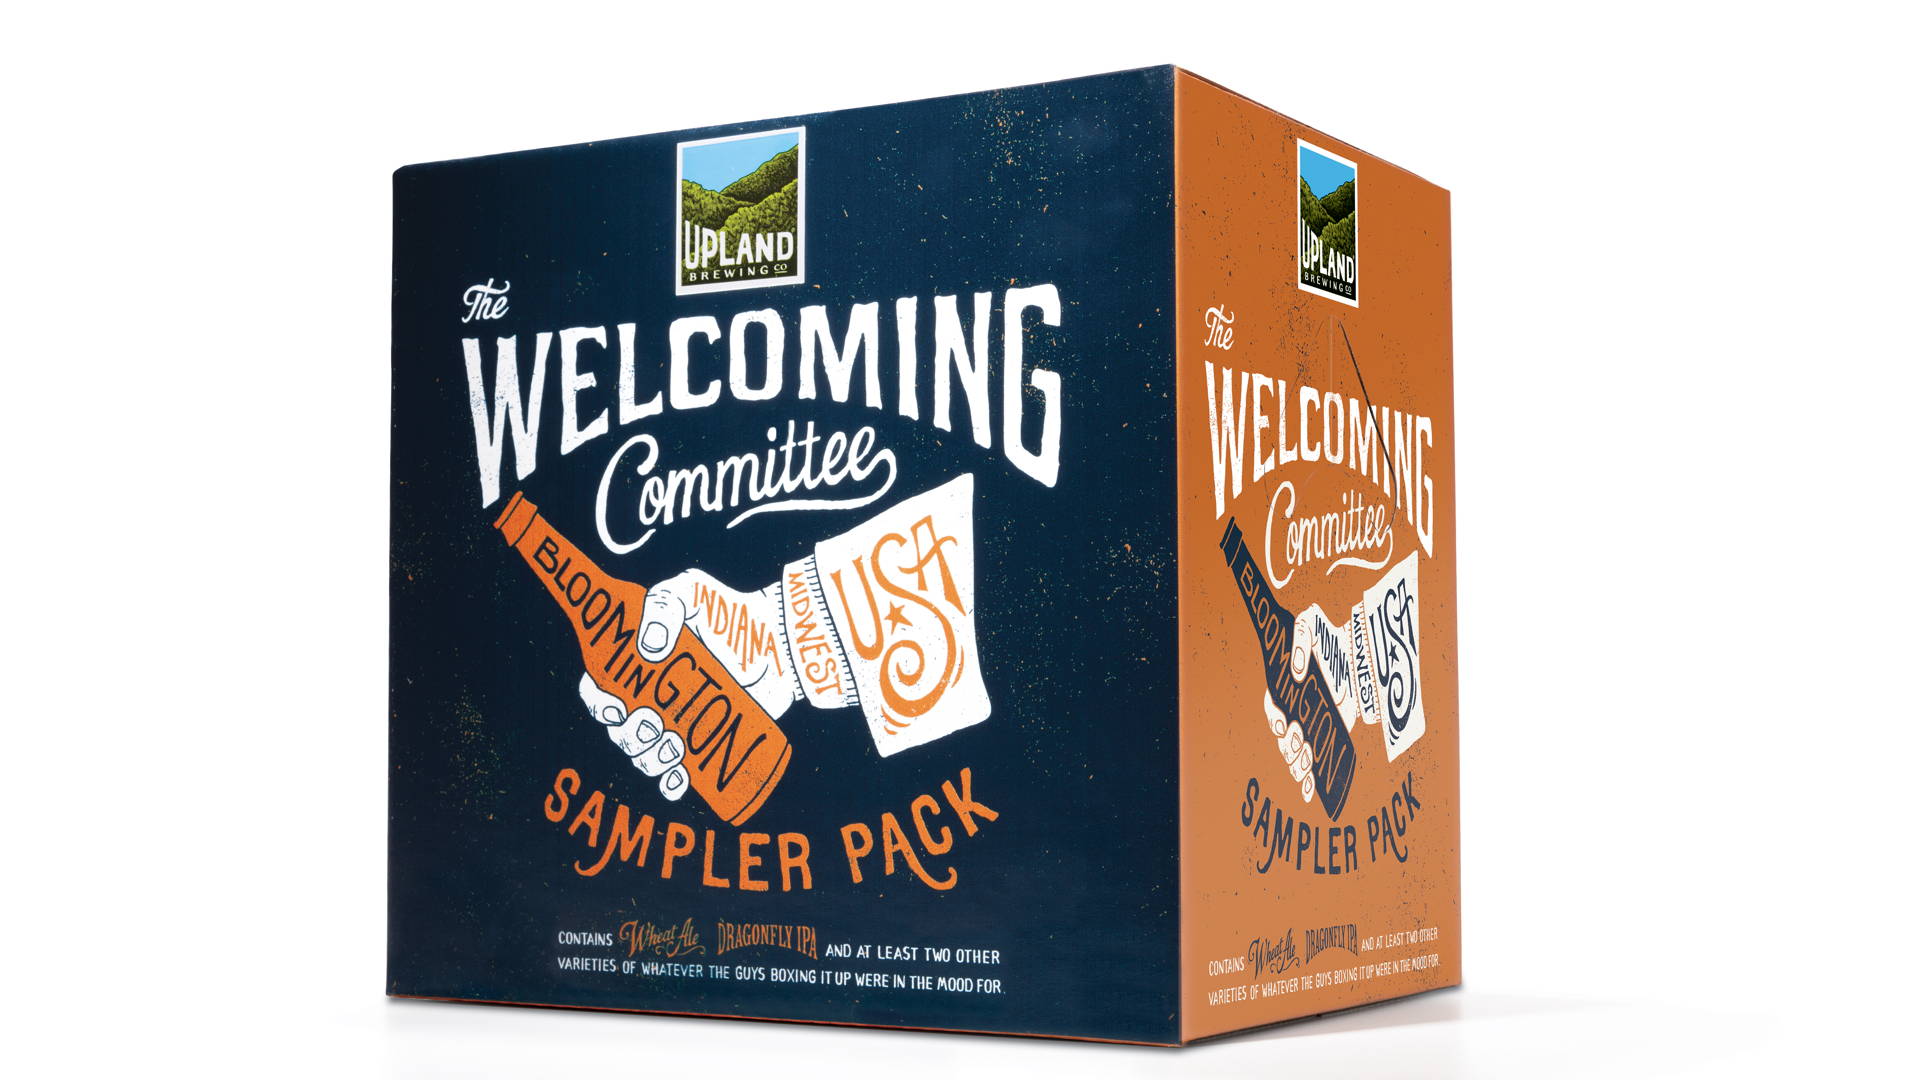 Featured image for Upland Brewing Co.'s The Welcoming Committee Sampler Pack